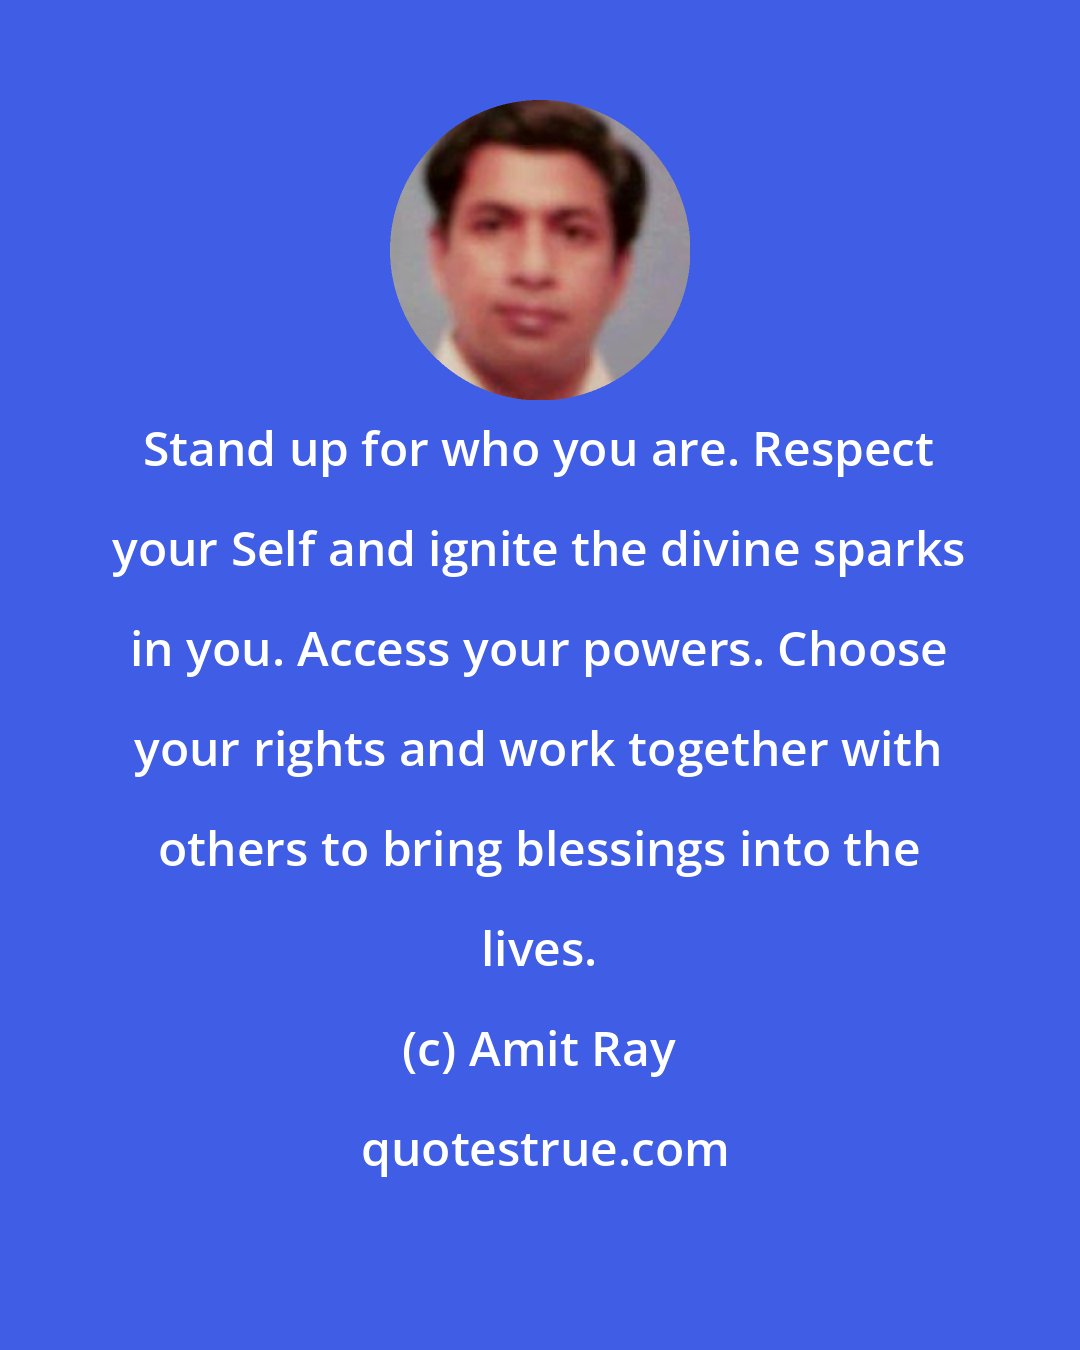 Amit Ray: Stand up for who you are. Respect your Self and ignite the divine sparks in you. Access your powers. Choose your rights and work together with others to bring blessings into the lives.